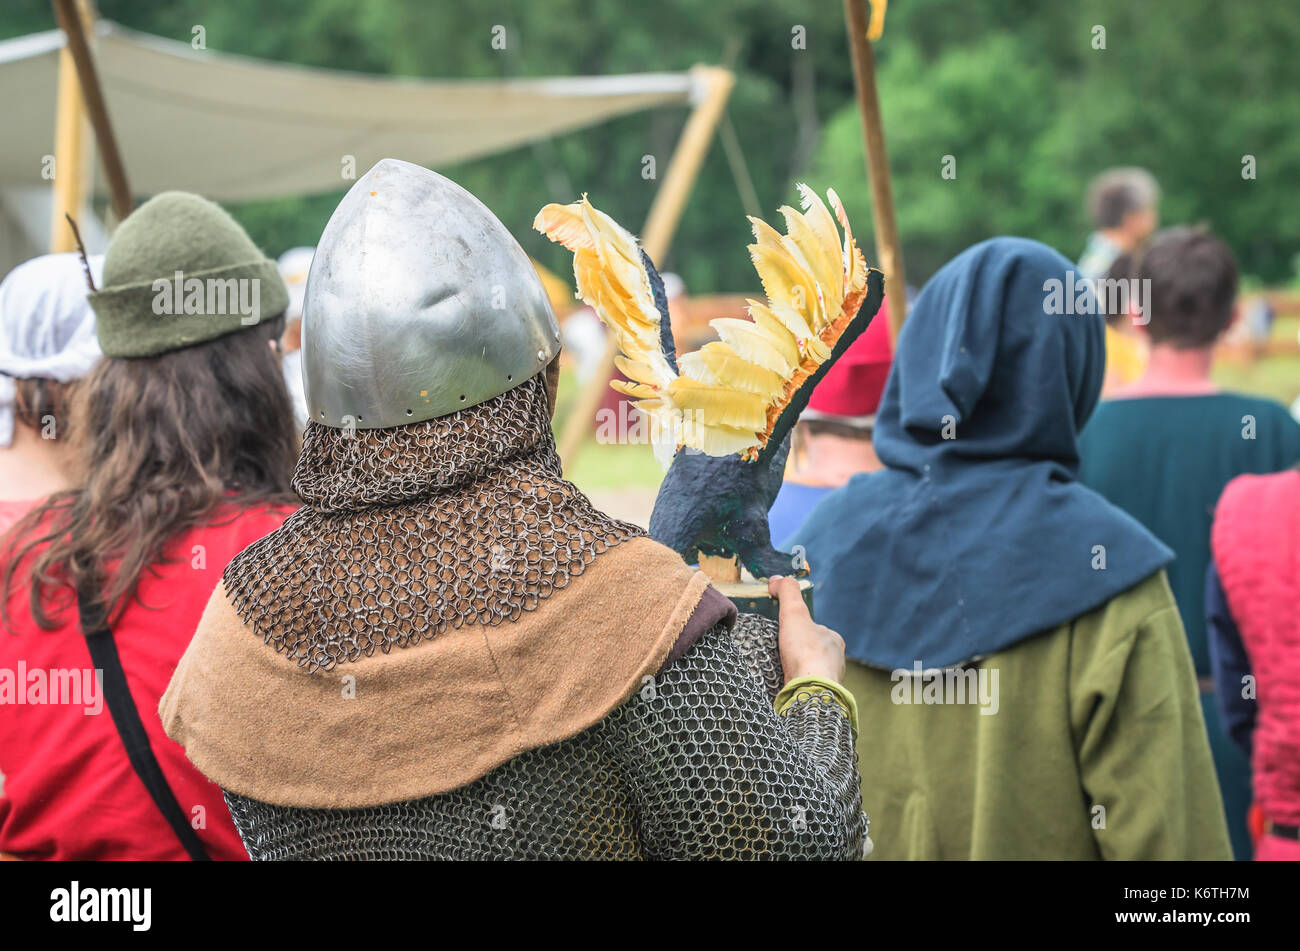 MOSCOW,RUSSIA-June 06,2016: Warriors in ancient costumes are marching to battlefield. Stock Photo